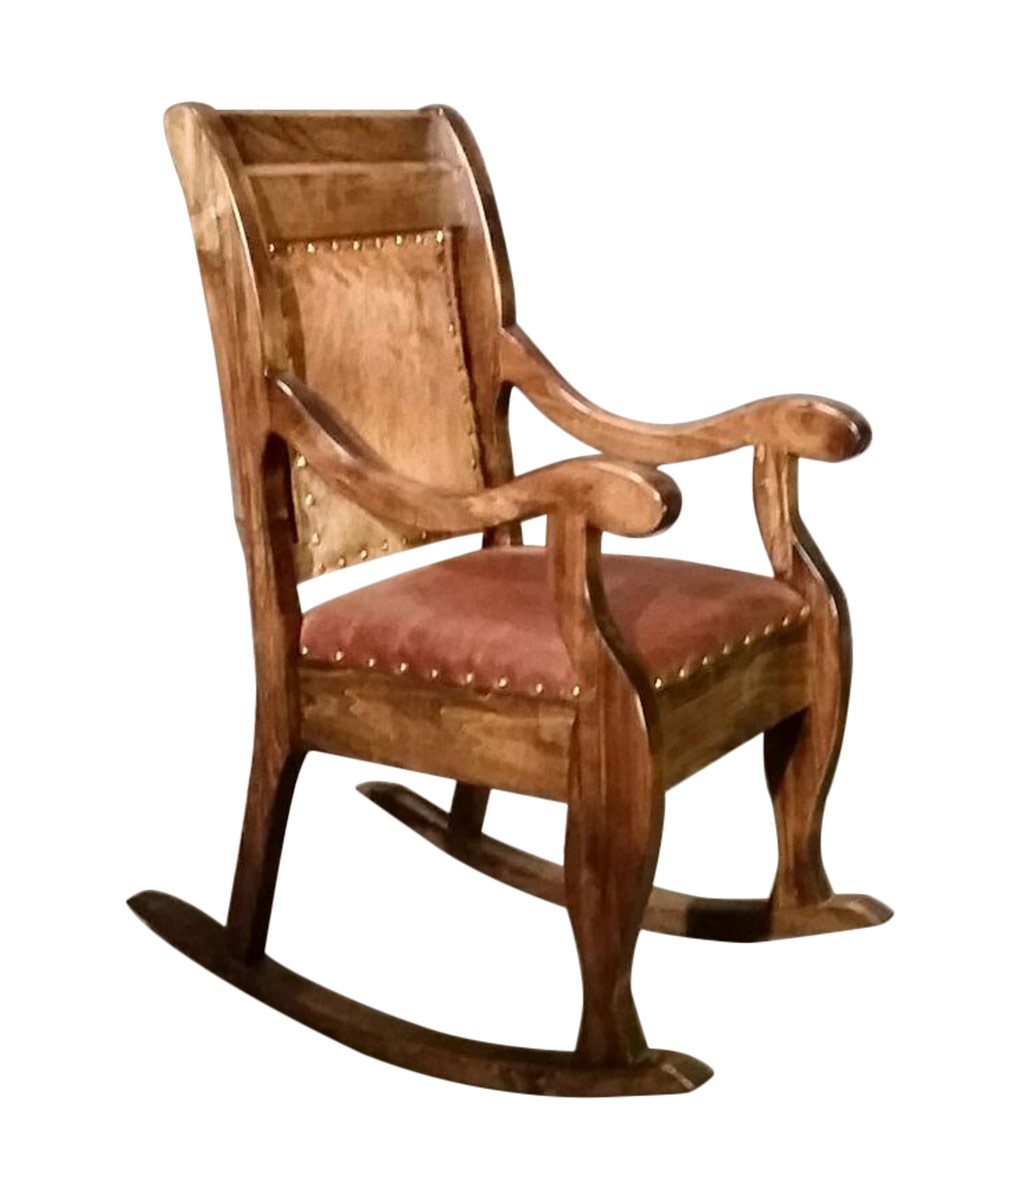 Traditional Rocking Chair Wood Frame with Leather or Cowhide Seat